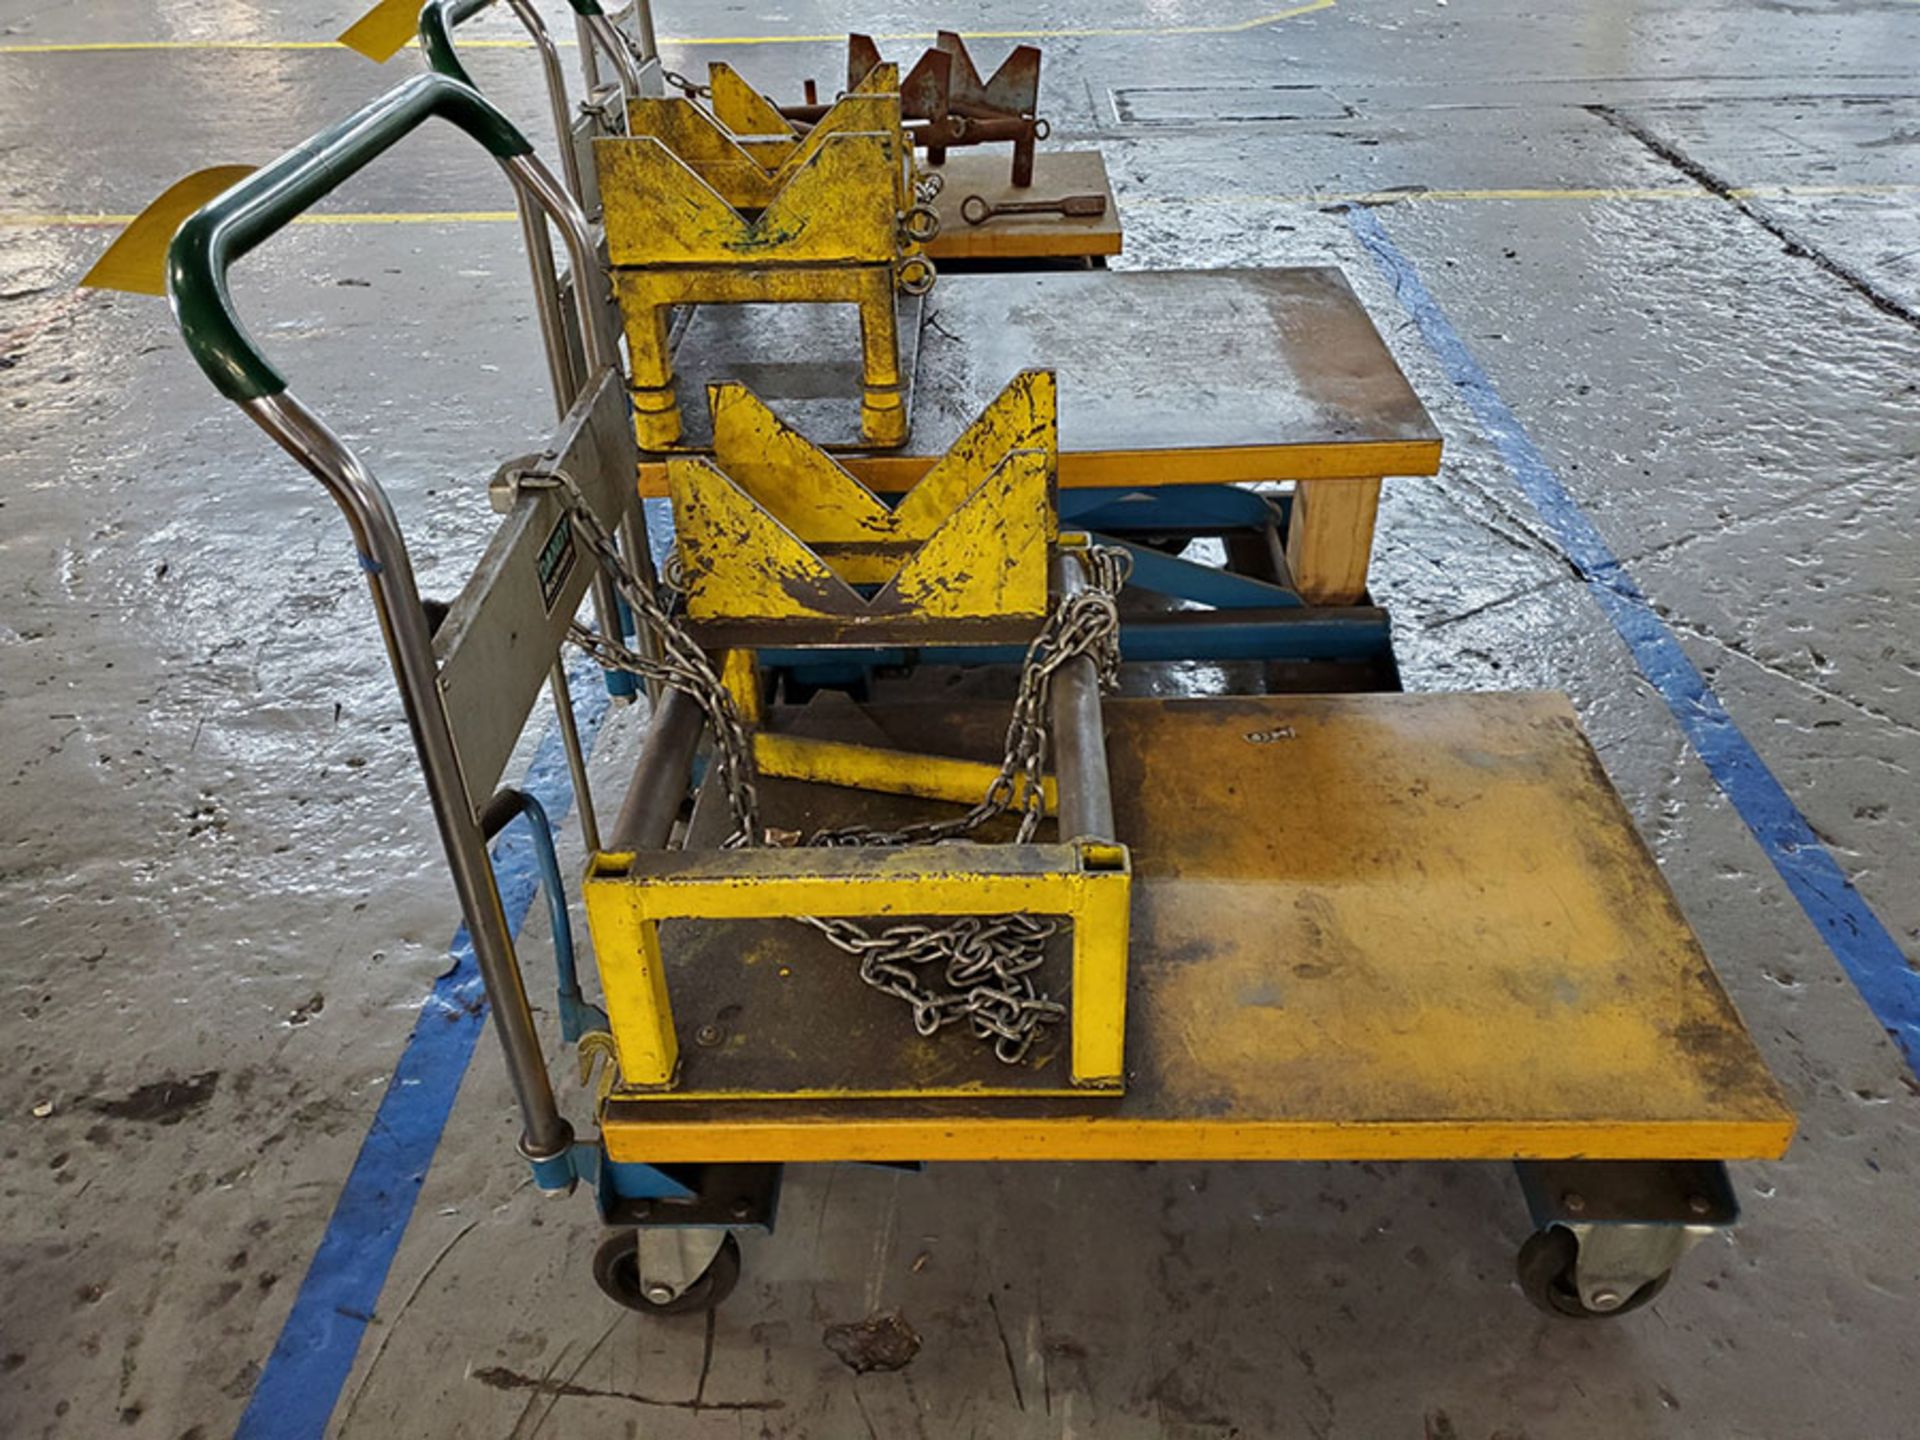 DANDY 1,100 LB. HYDRAULIC DIE LIFT CARTS WITH ADJUSTABLE SADDLE FIXTURES - Image 5 of 5